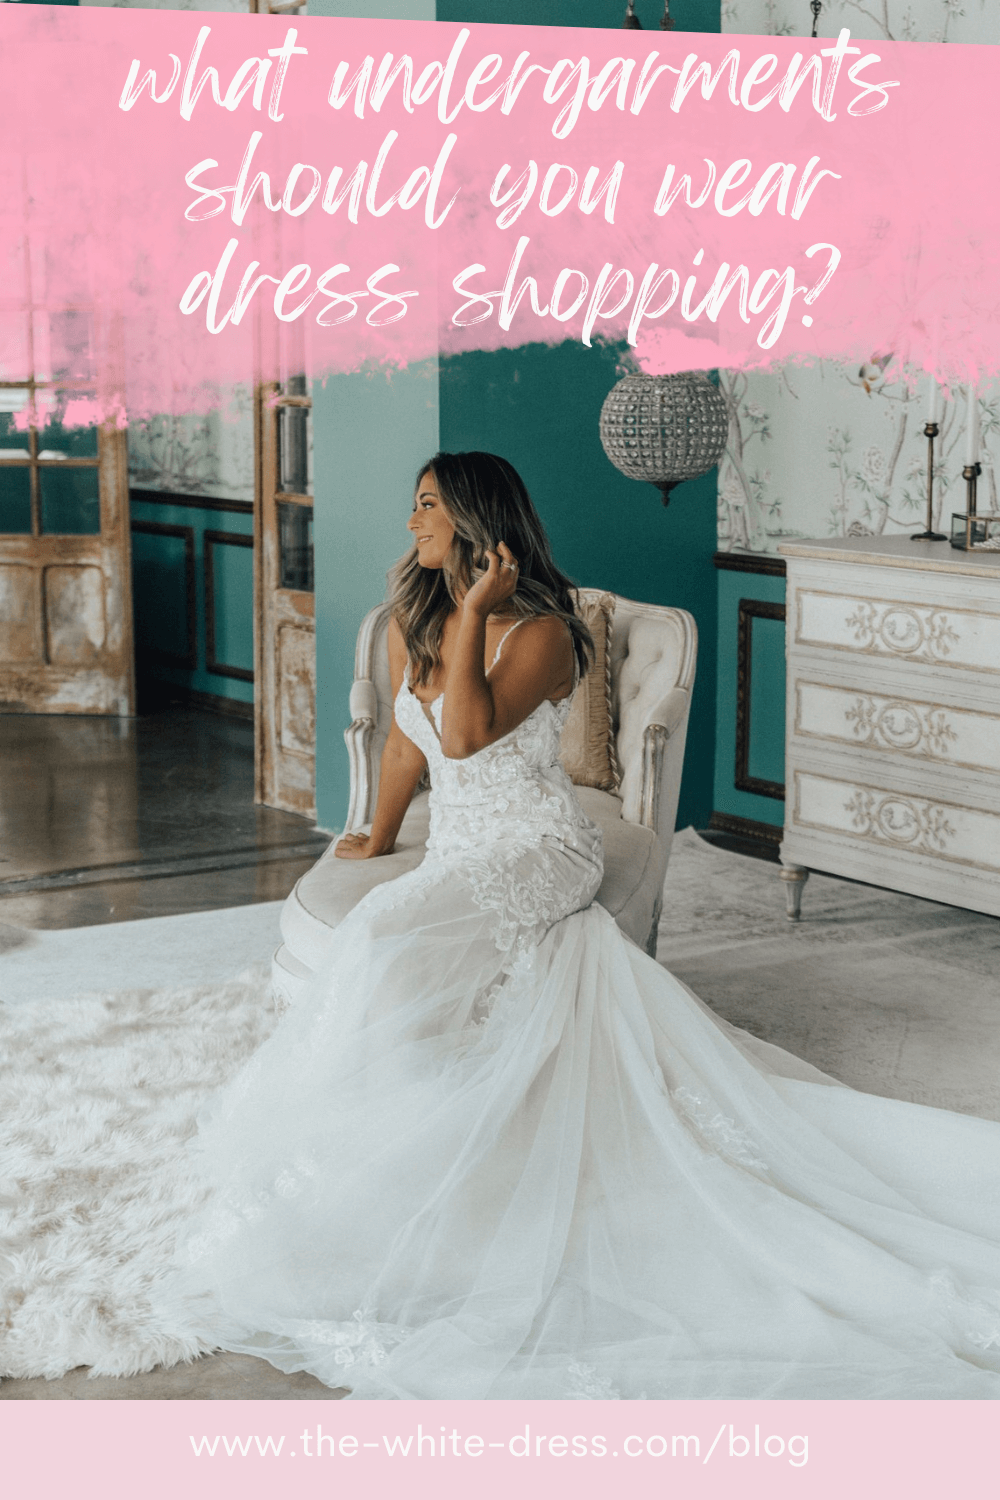 What Undergarments Should You Wear Wedding Dress Shopping? - The White Dress